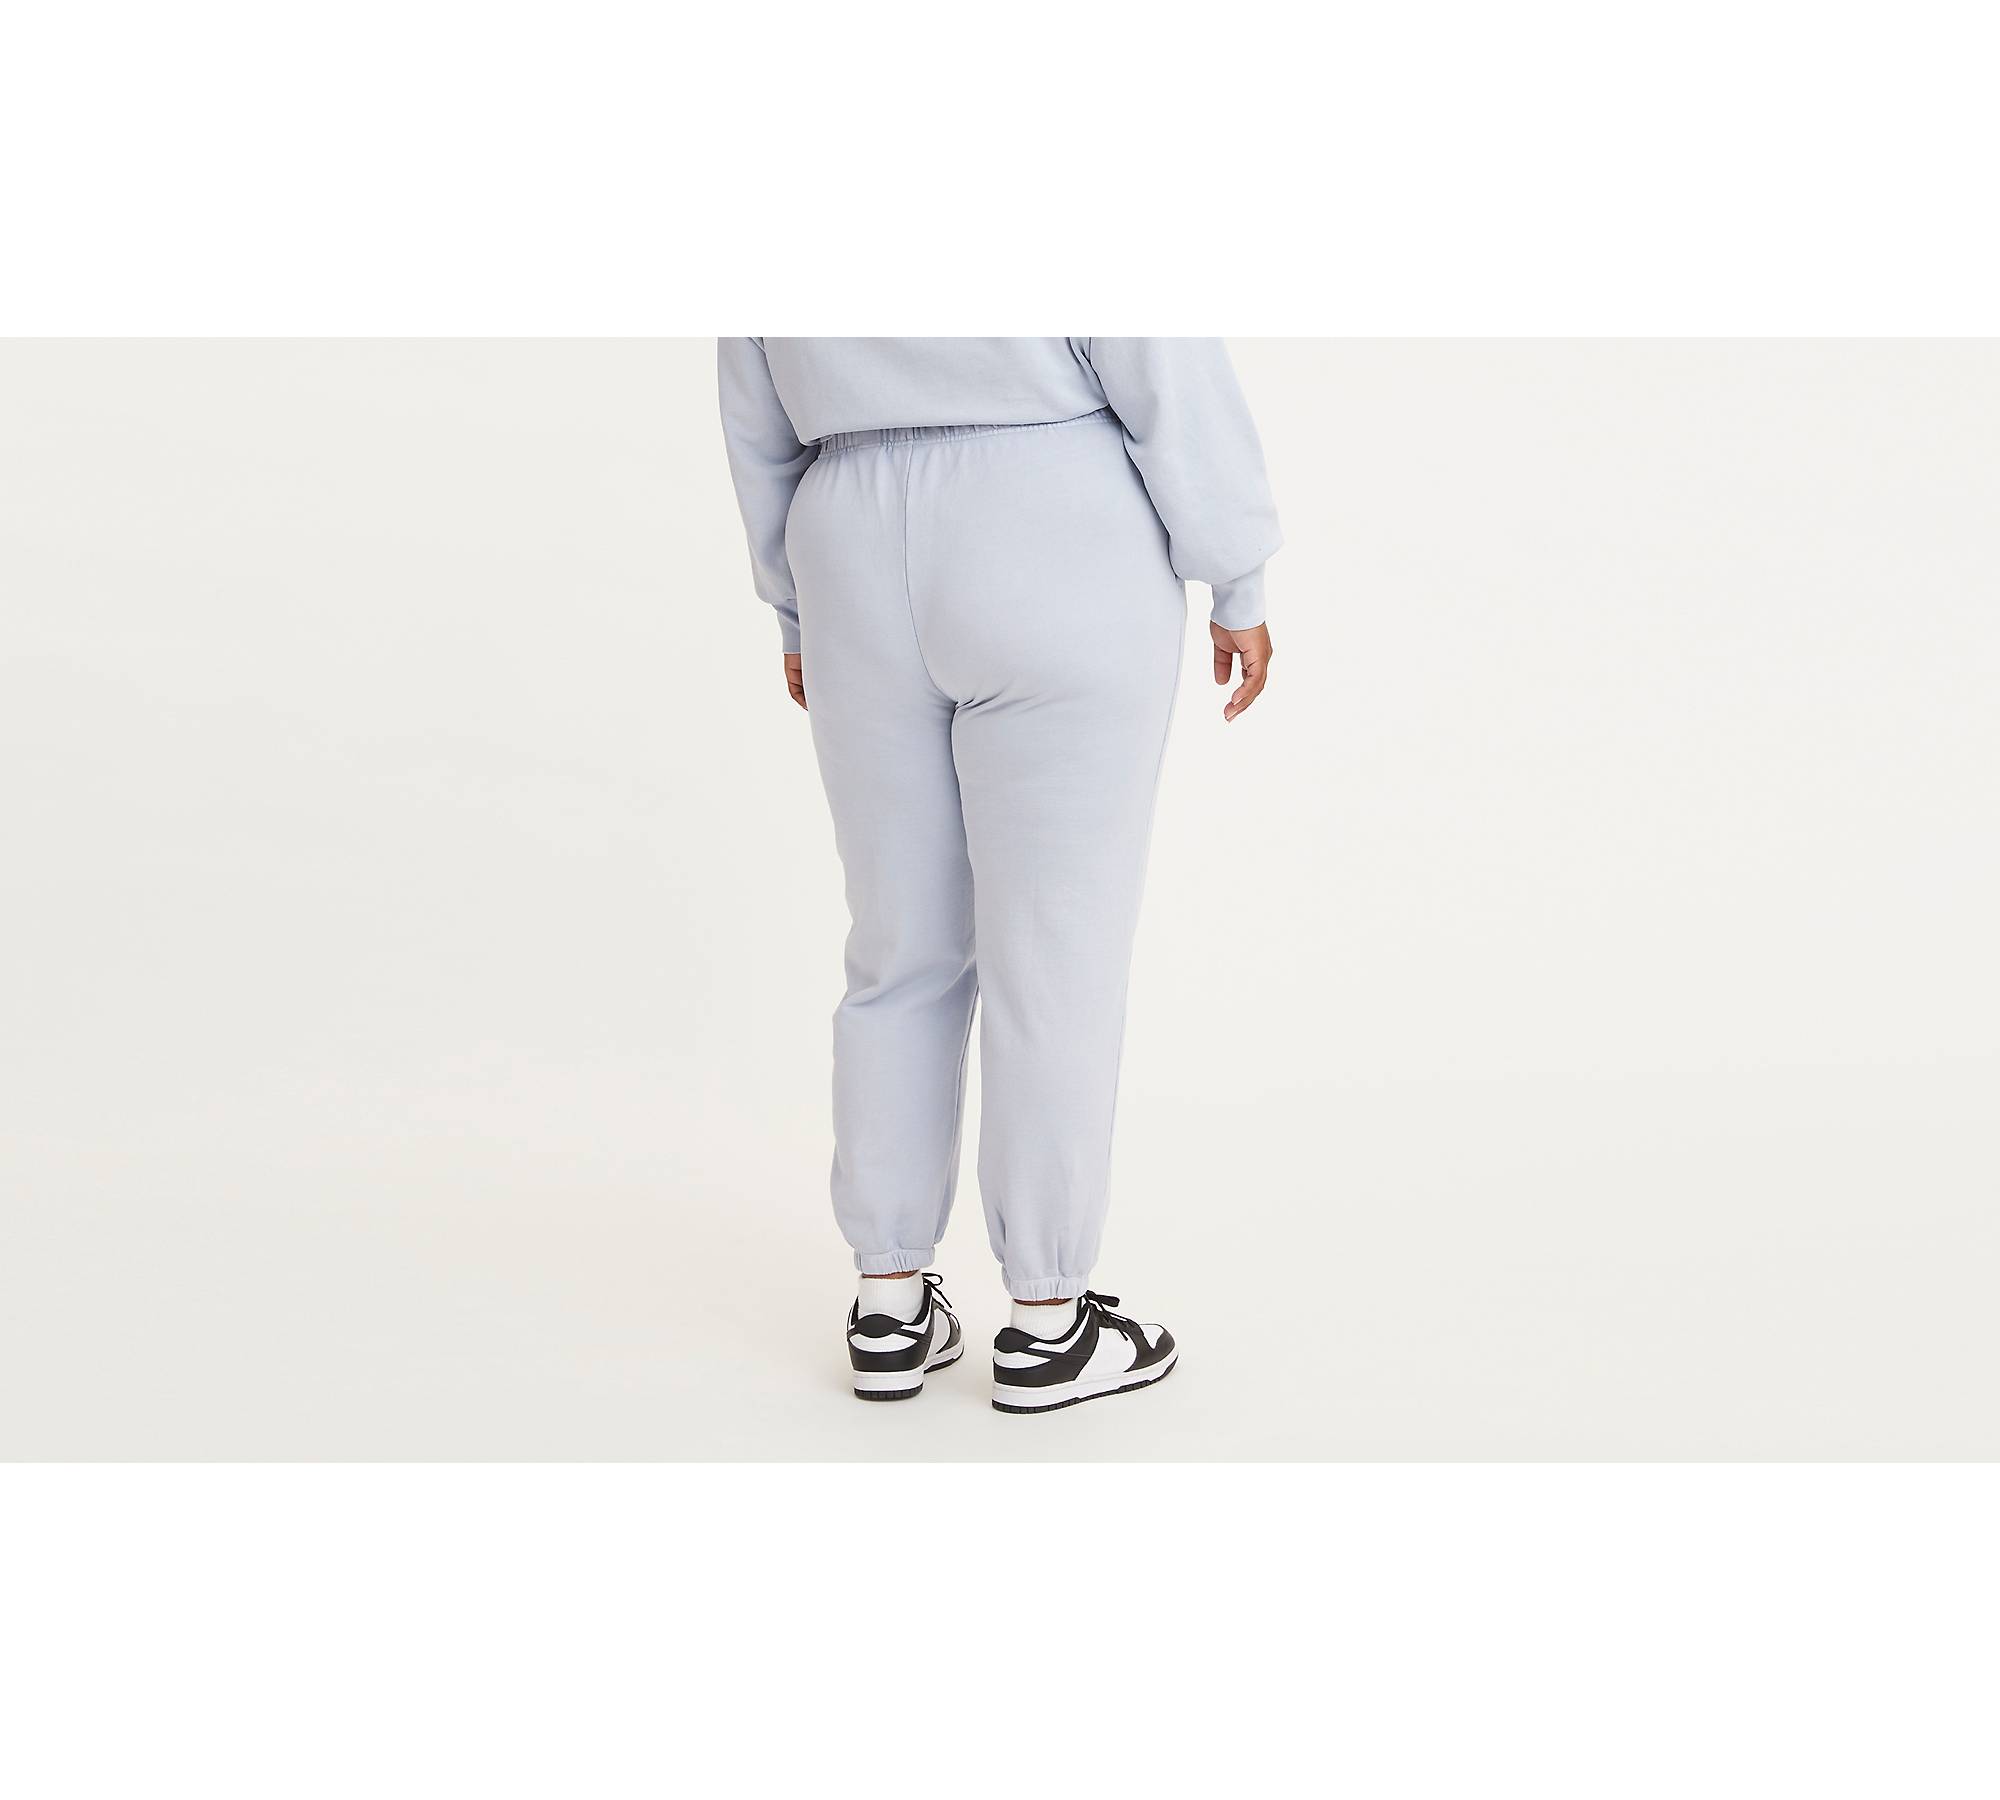 Jogger Plus Size Pants for Women's 3X Size for sale